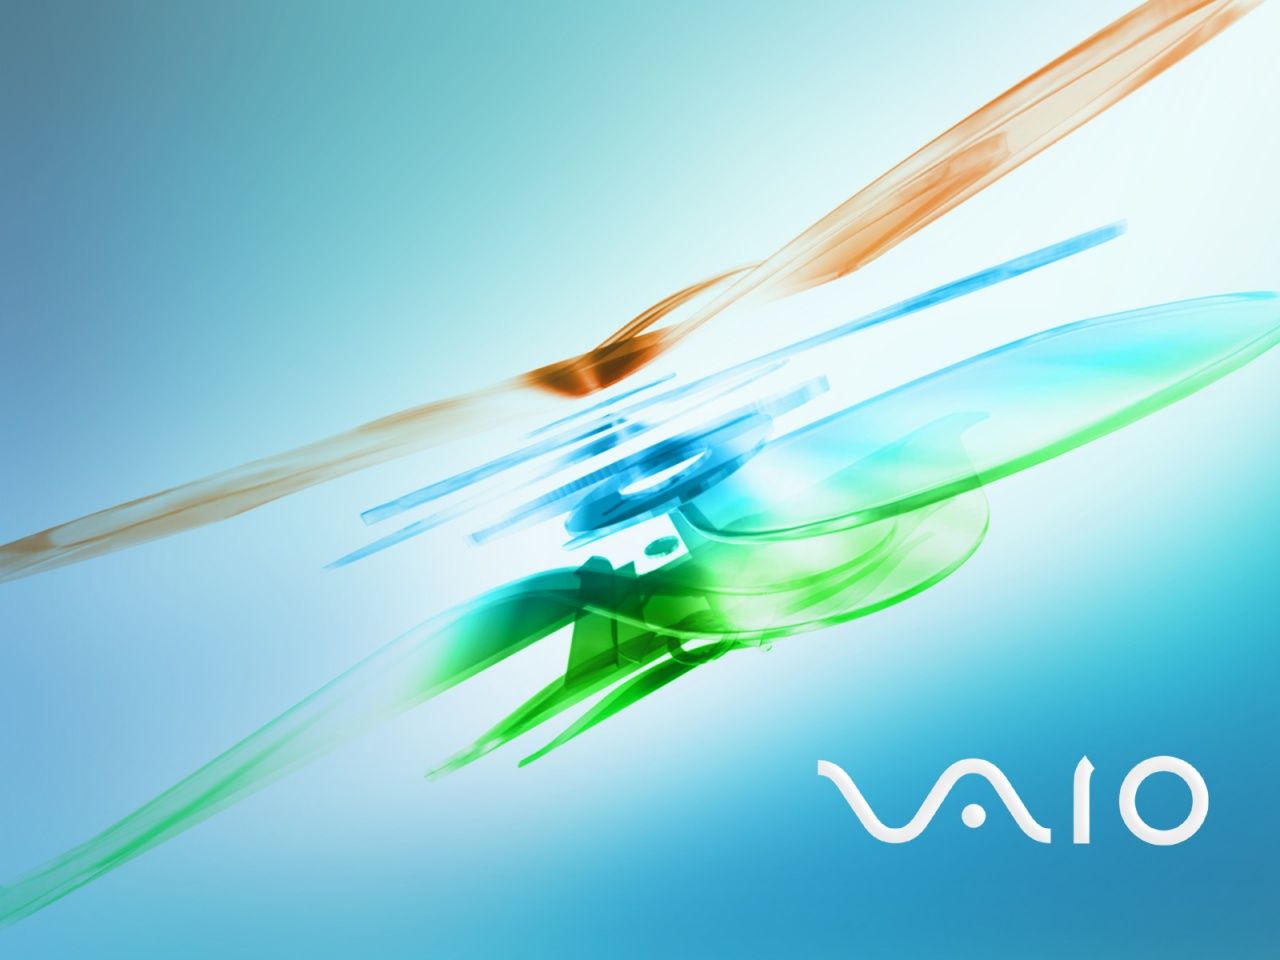  Sony  Vaio  HD  Wallpapers  High Definition  Free Background